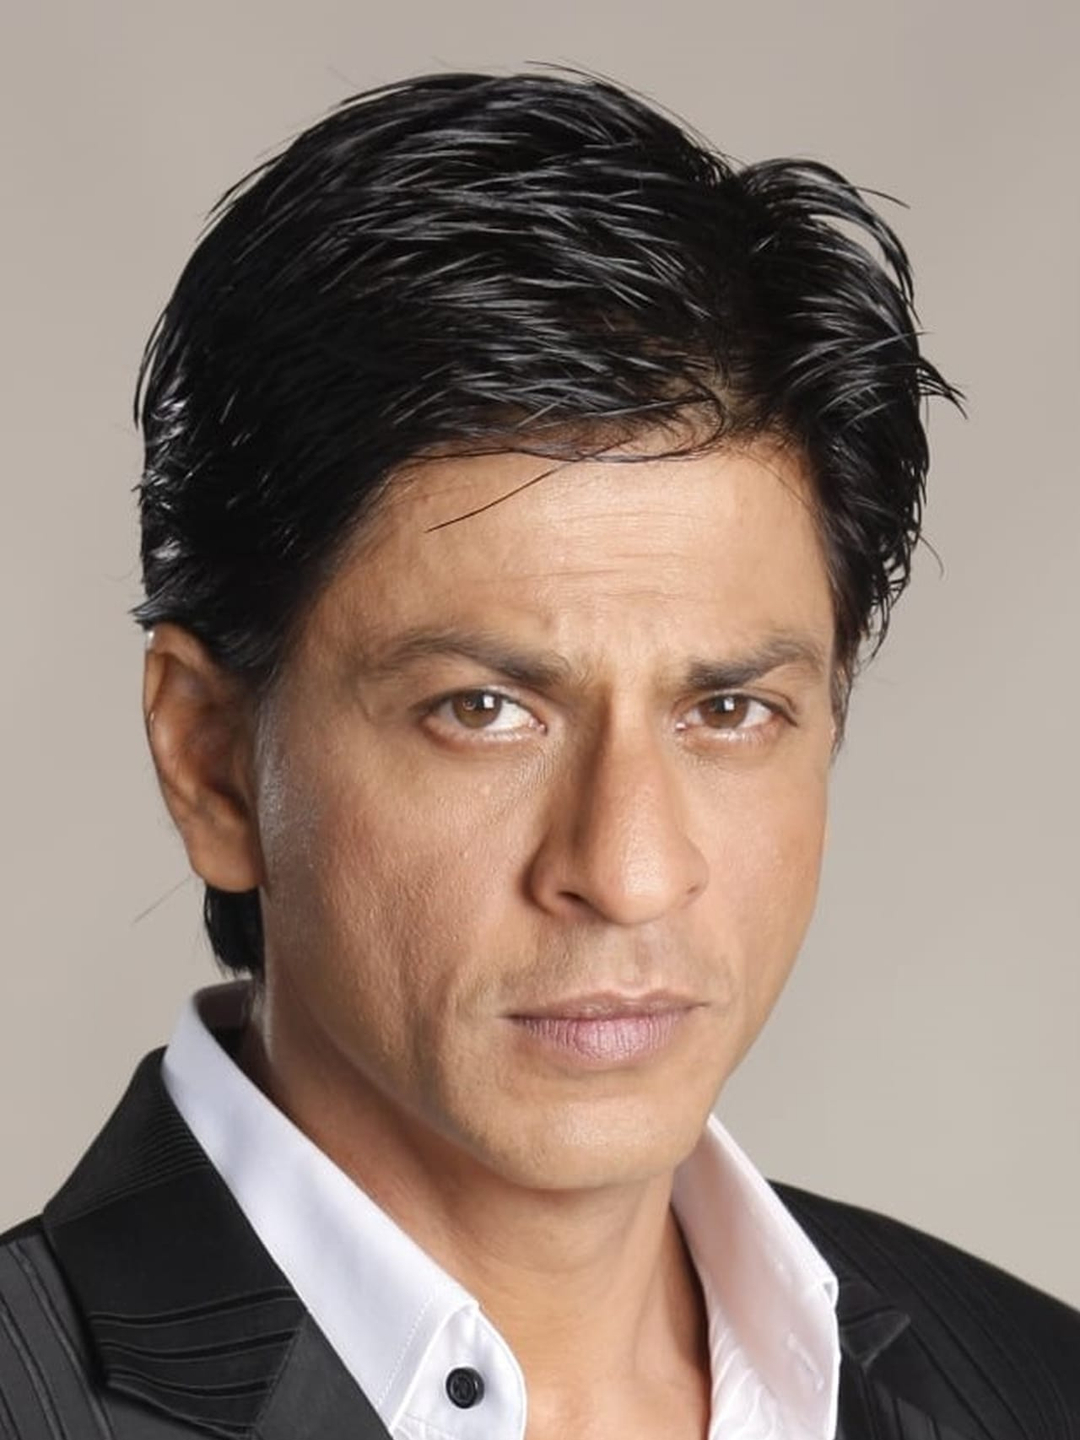 Shah Rukh Khan does he have a wife